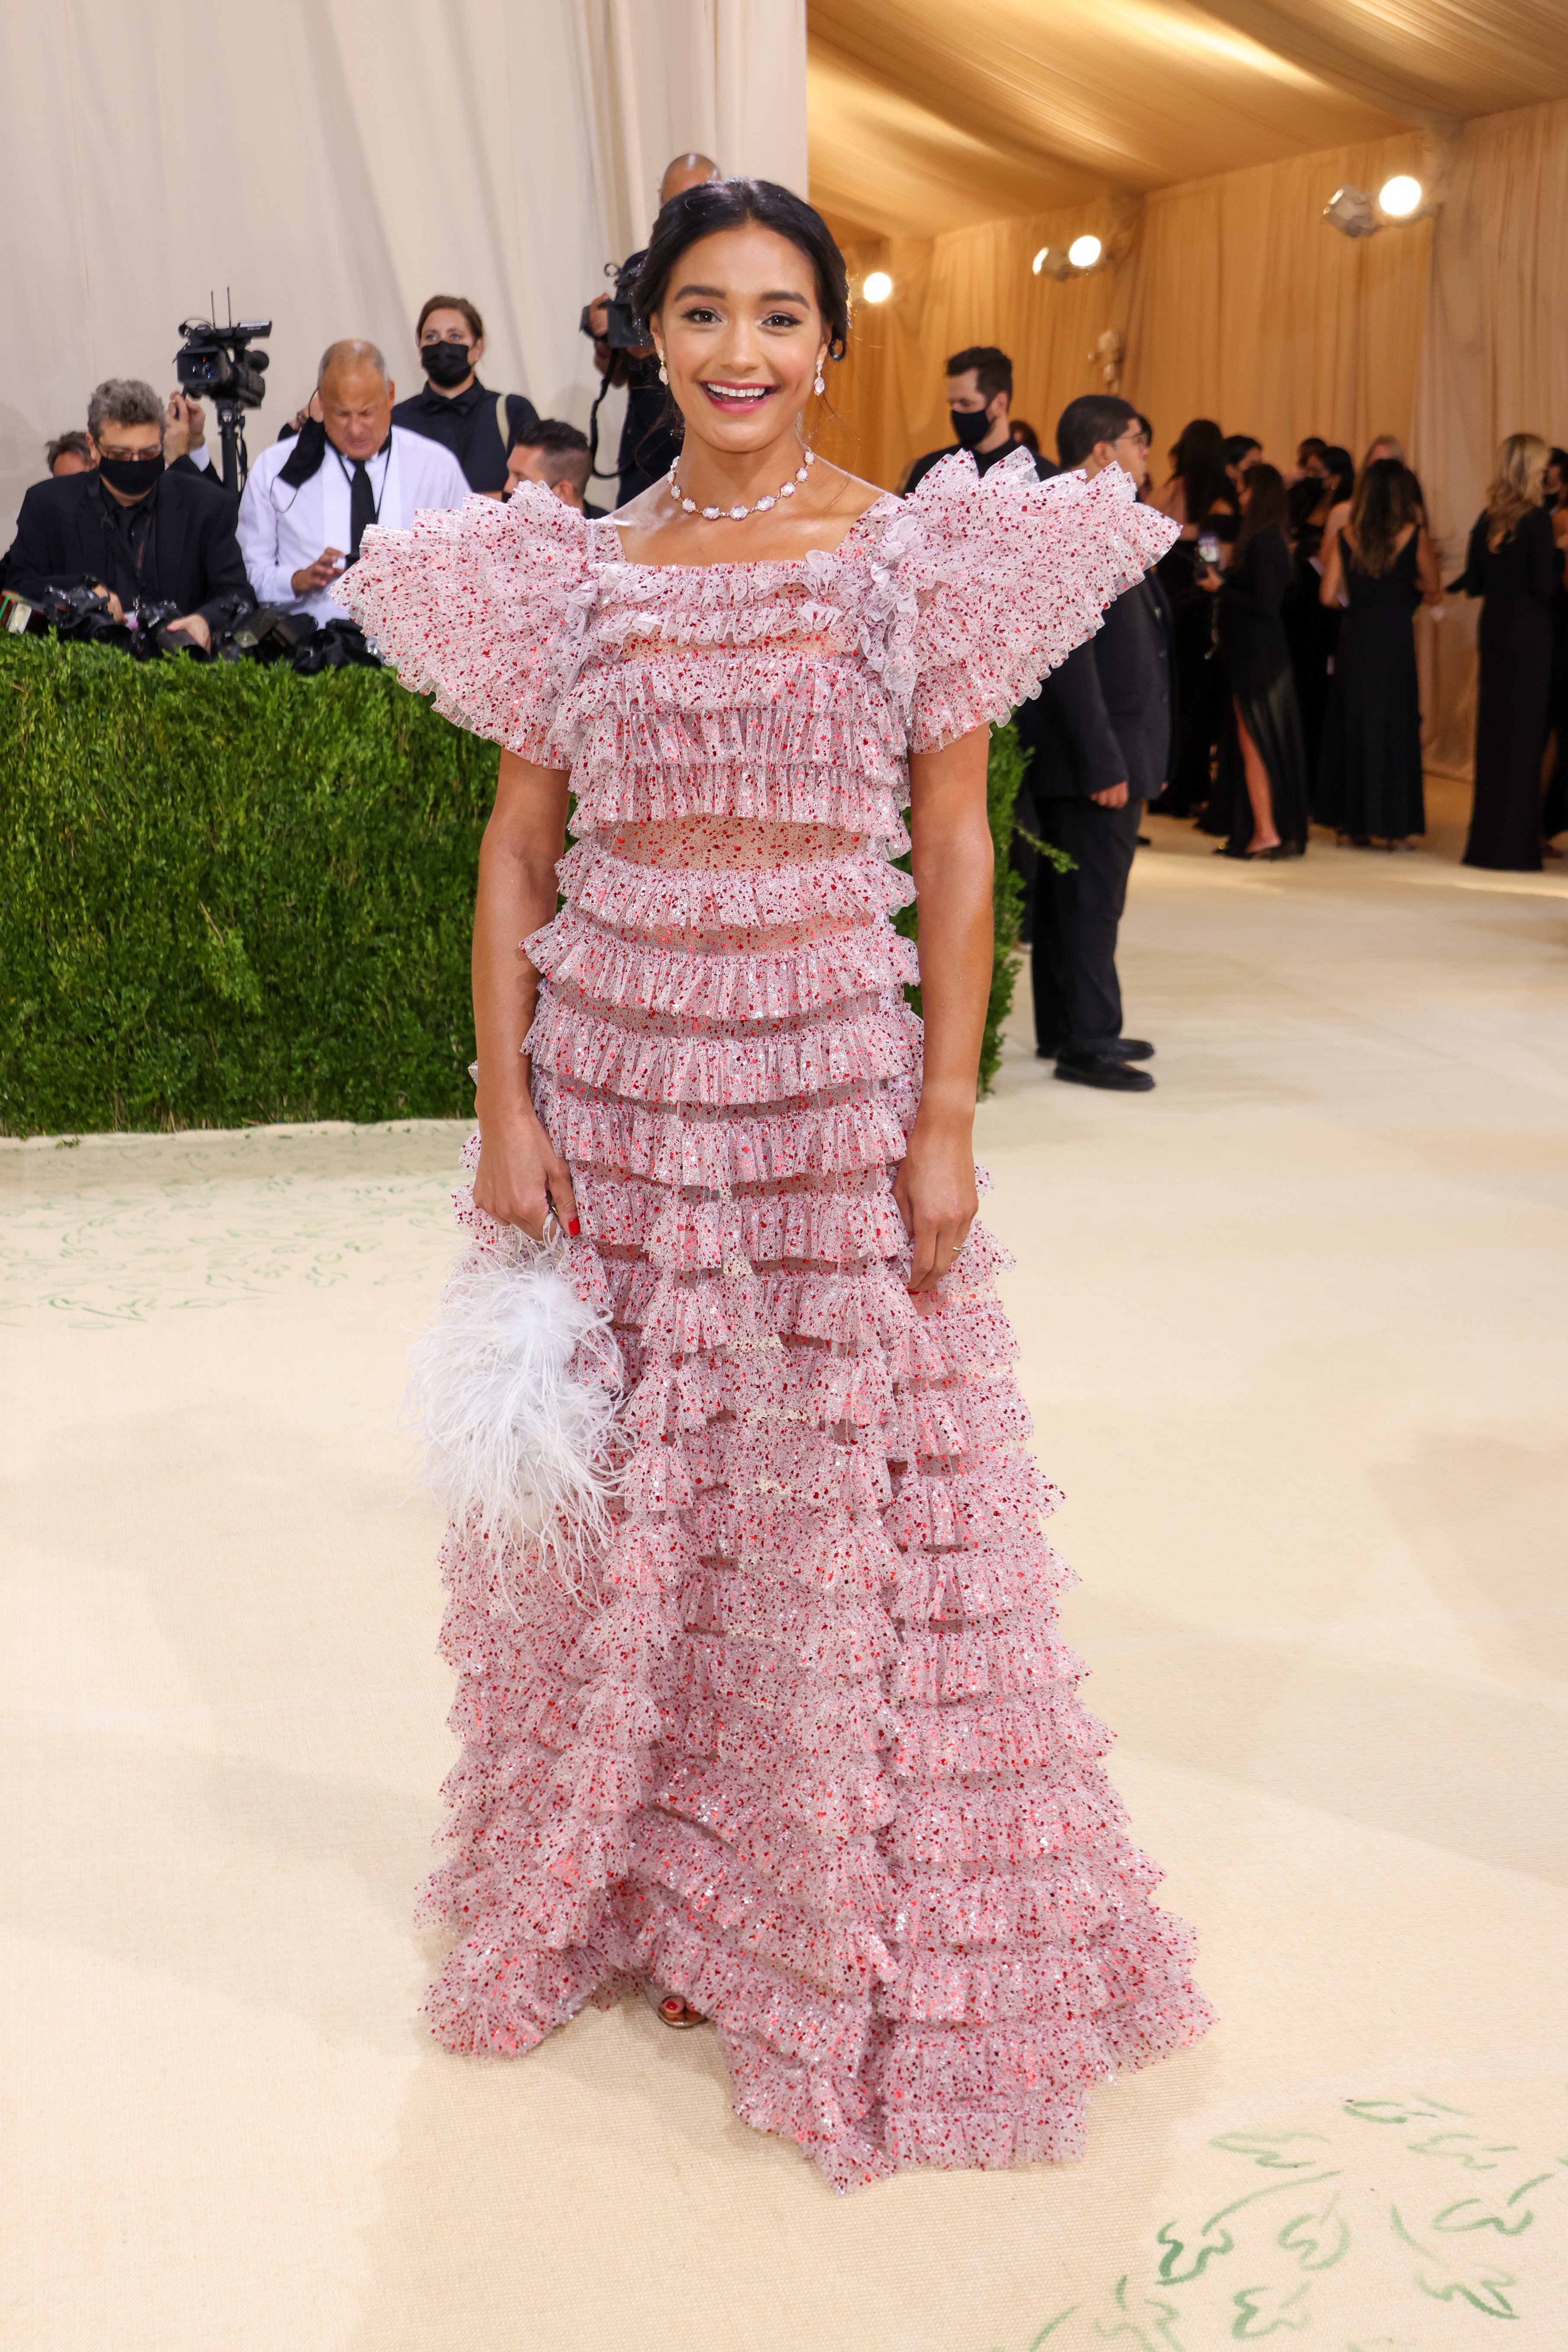 NEW YORK, NEW YORK - SEPTEMBER 13: Rachel Smith attends The 2021 Met Gala Celebrating In America: A Lexicon Of Fashion at Metropolitan Museum of Art on September 13, 2021 in New York City. (Photo by John Shearer/WireImage) (Foto: WireImage)